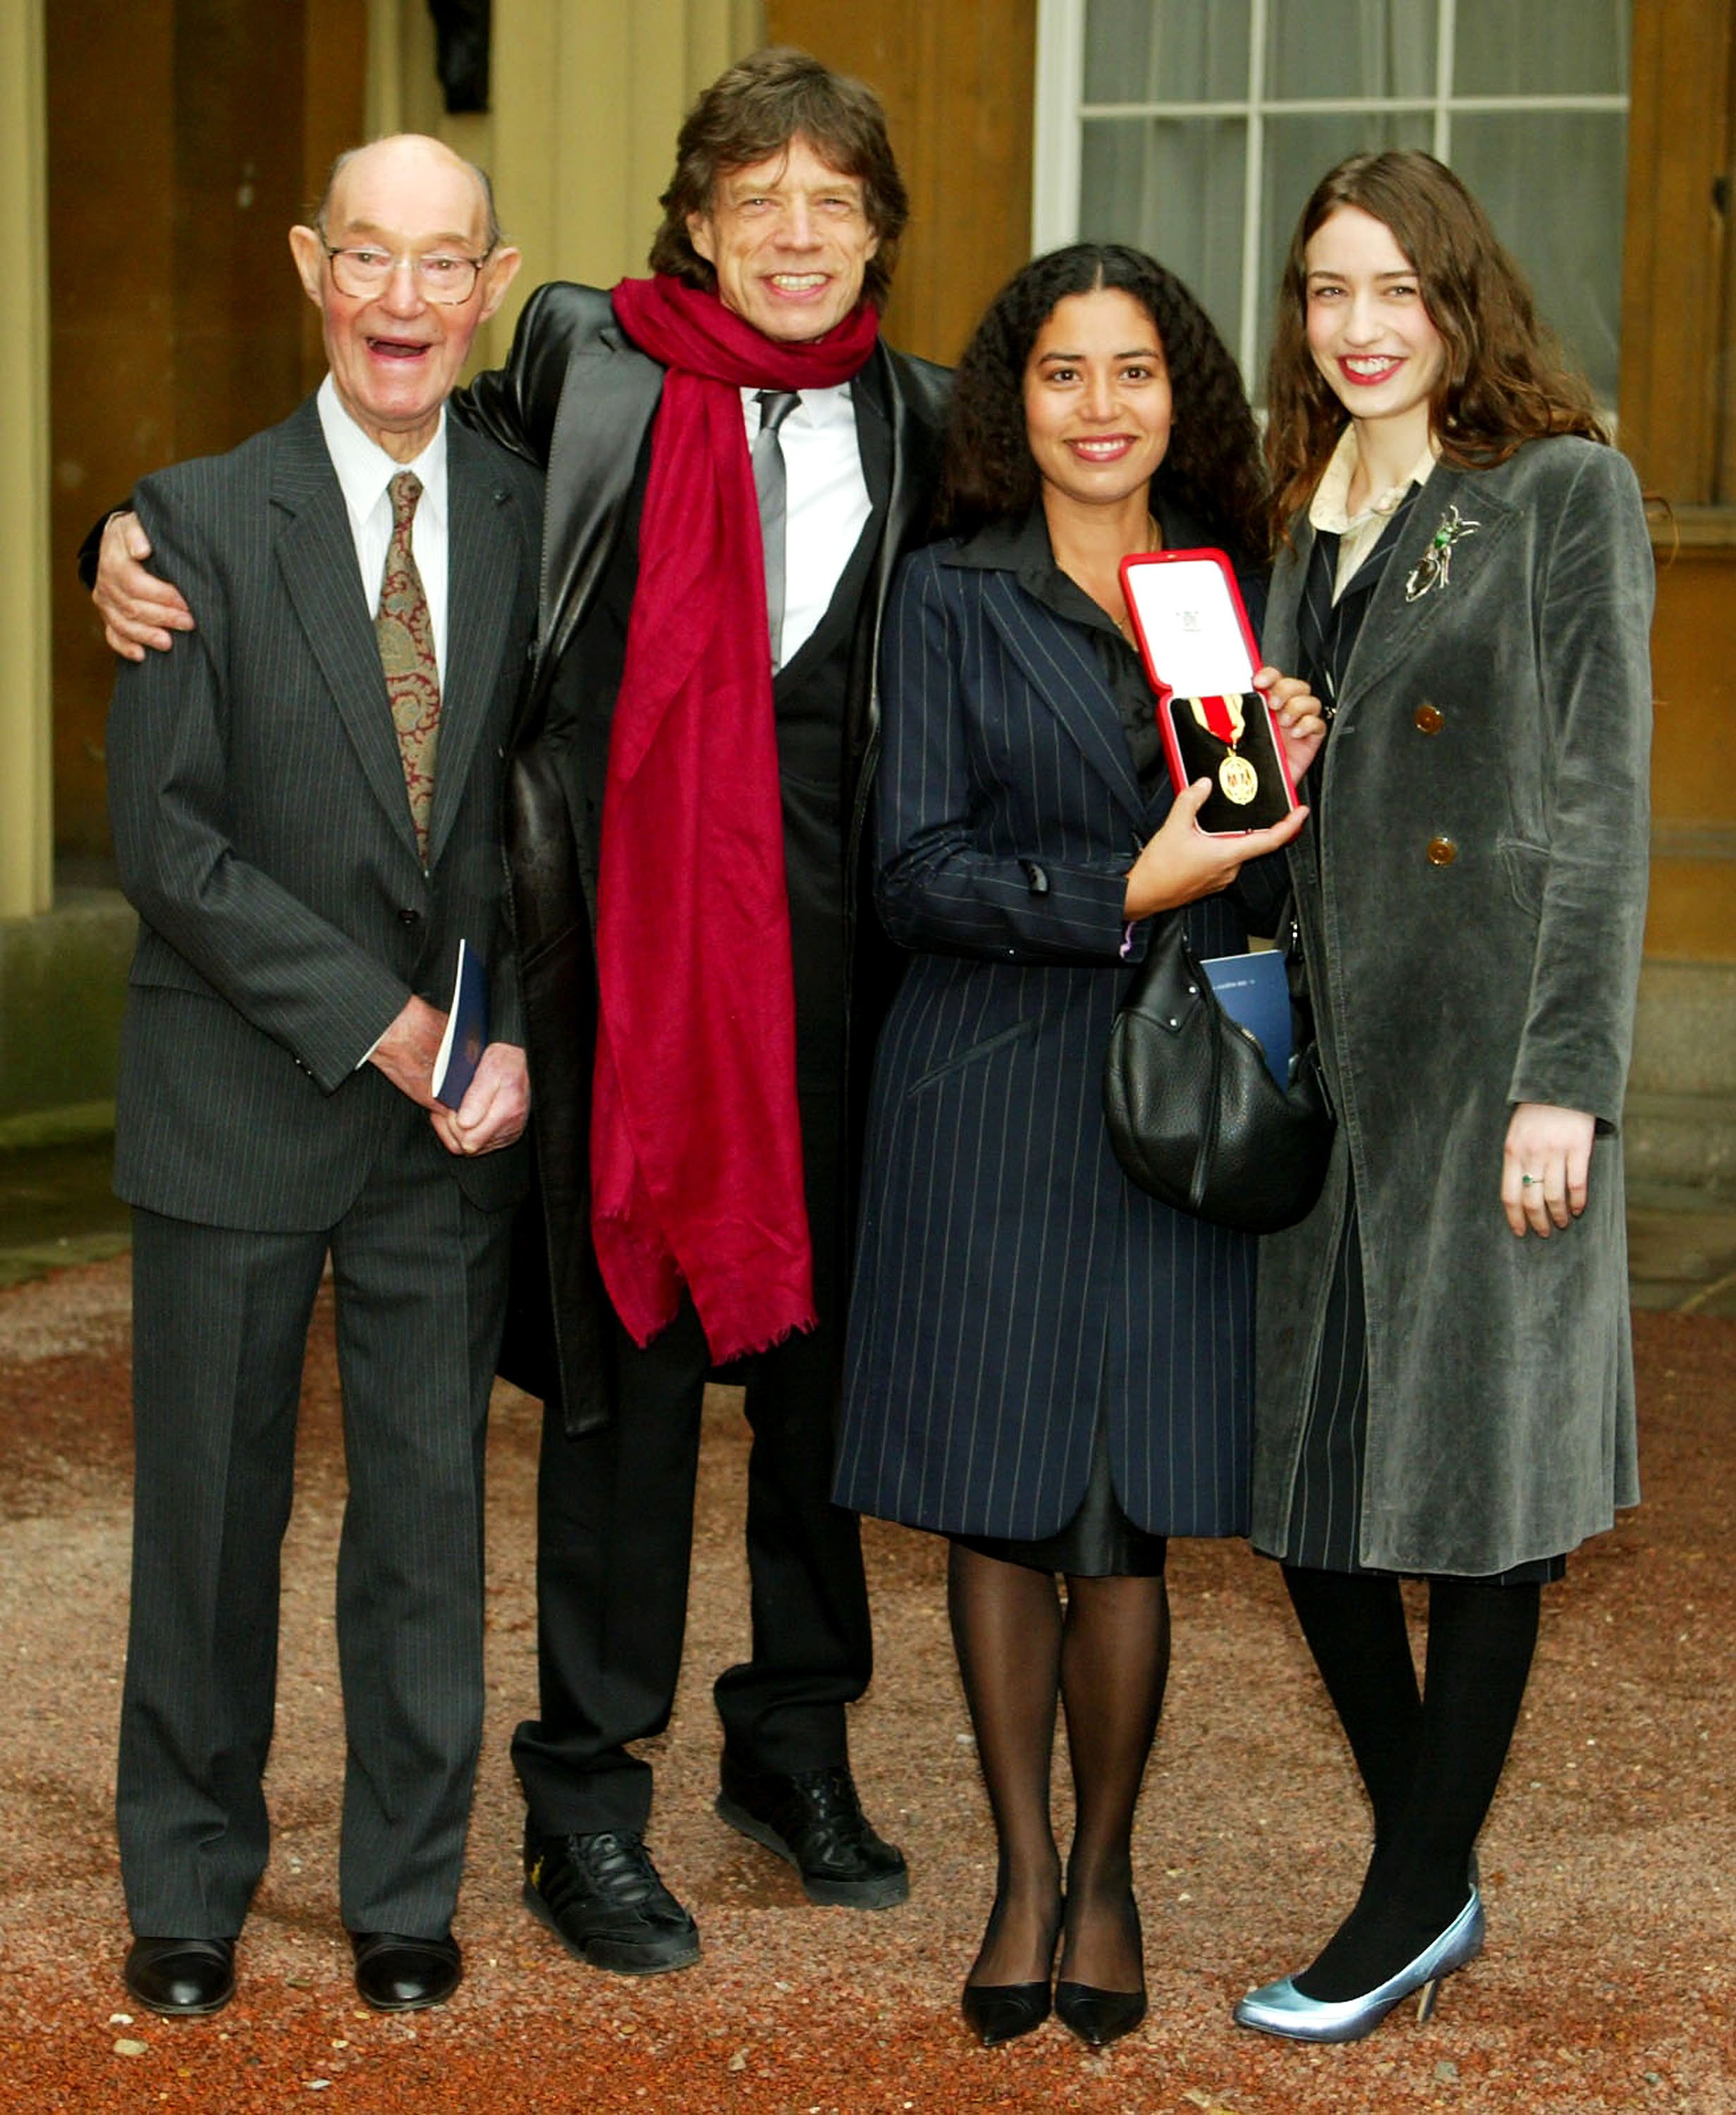 Father Joe with veteran rocker Mick Jagger and daughters Karis and Elizabeth at Buckingham Palace on December 12, 2003 in London. / Source: Getty Images